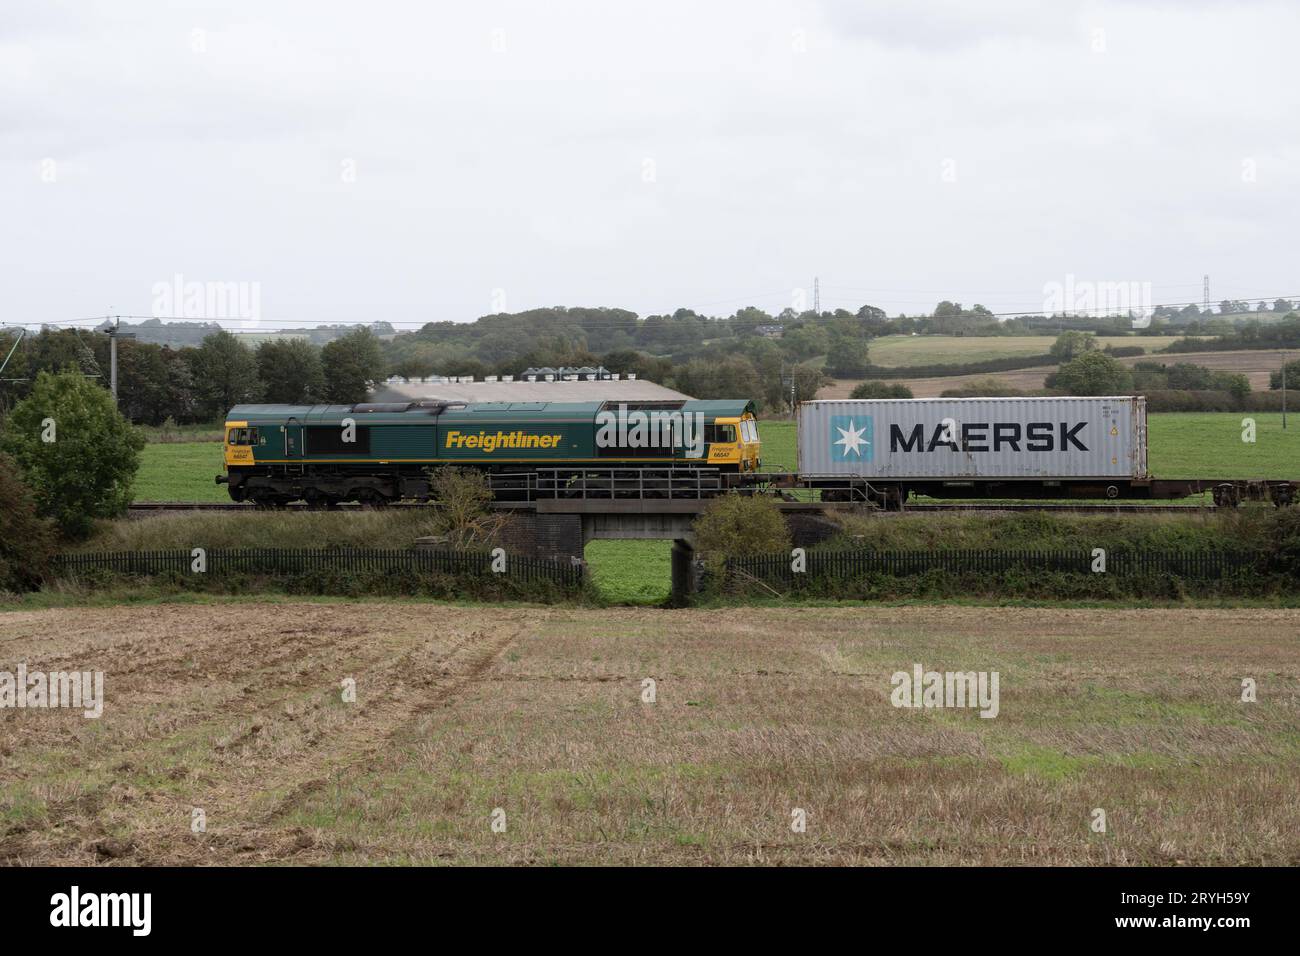 Class 66 diesel locomotive No. 66547 pulling a freightliner train on the West Coast Main Line, Northamptonshire, England, UK Stock Photo